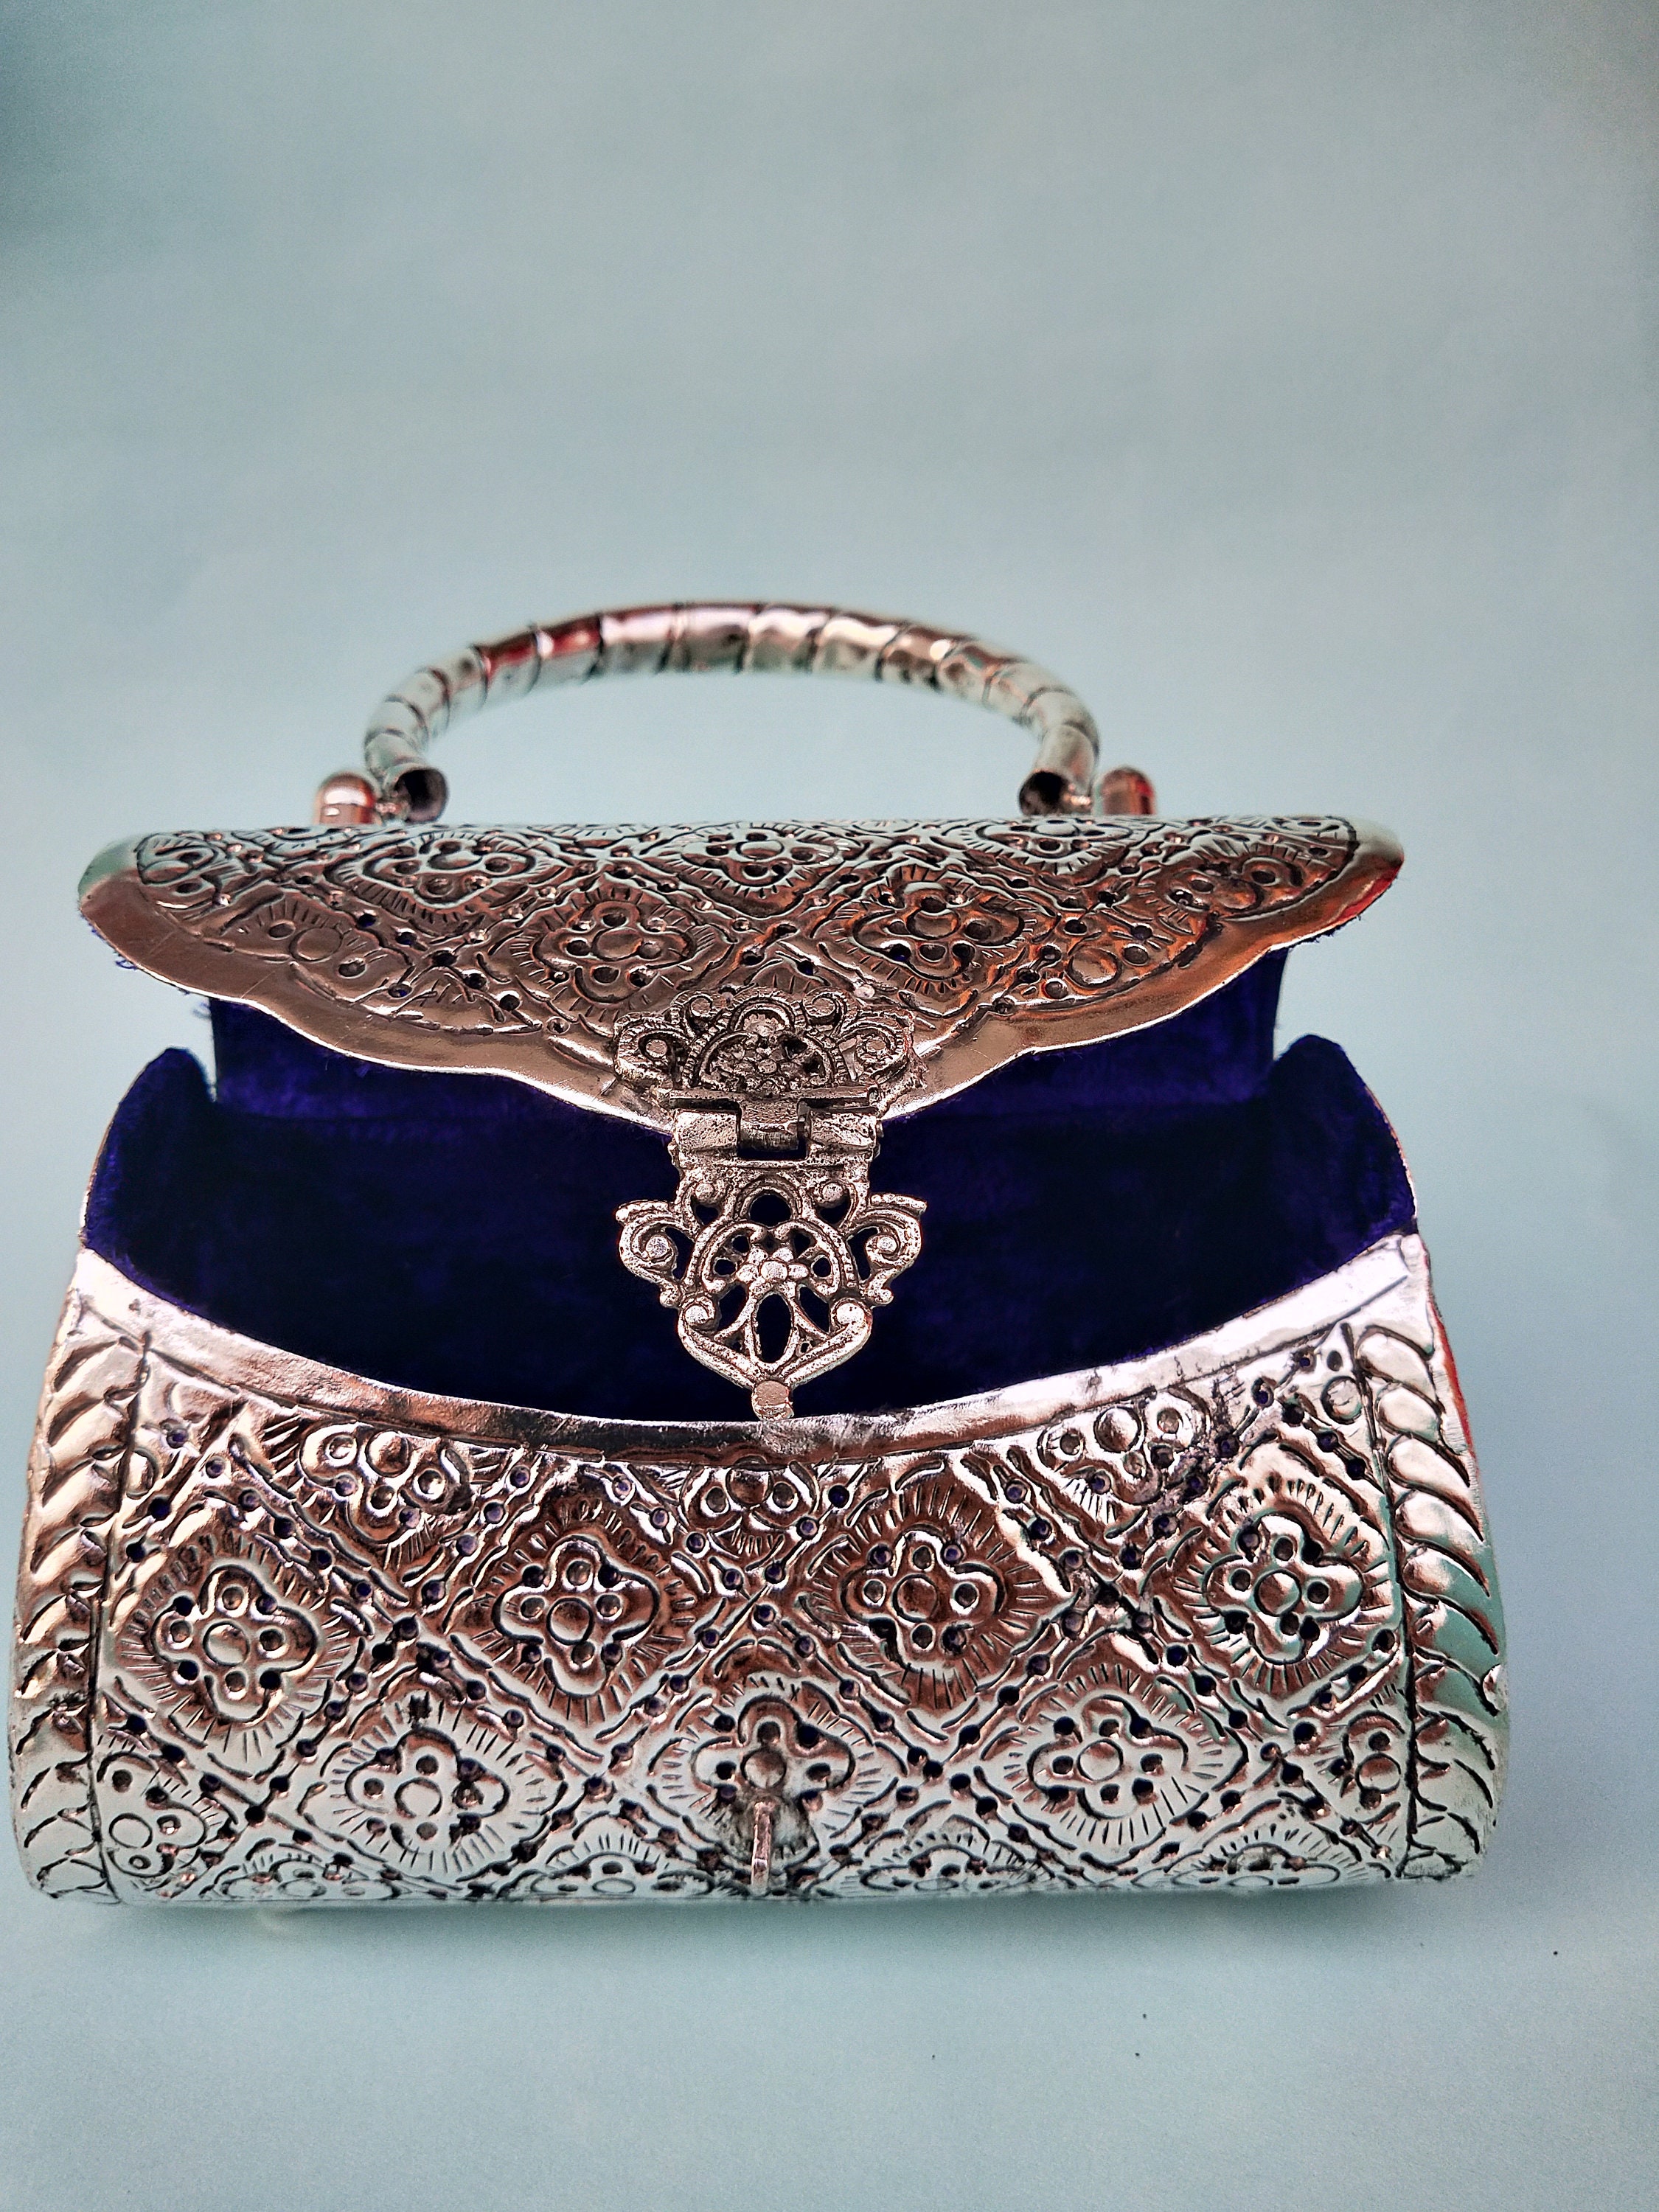 Silver Metal Bag & Red Stones Accents Evening Clutch Purse Handbag w/ Strap  Handmade in India